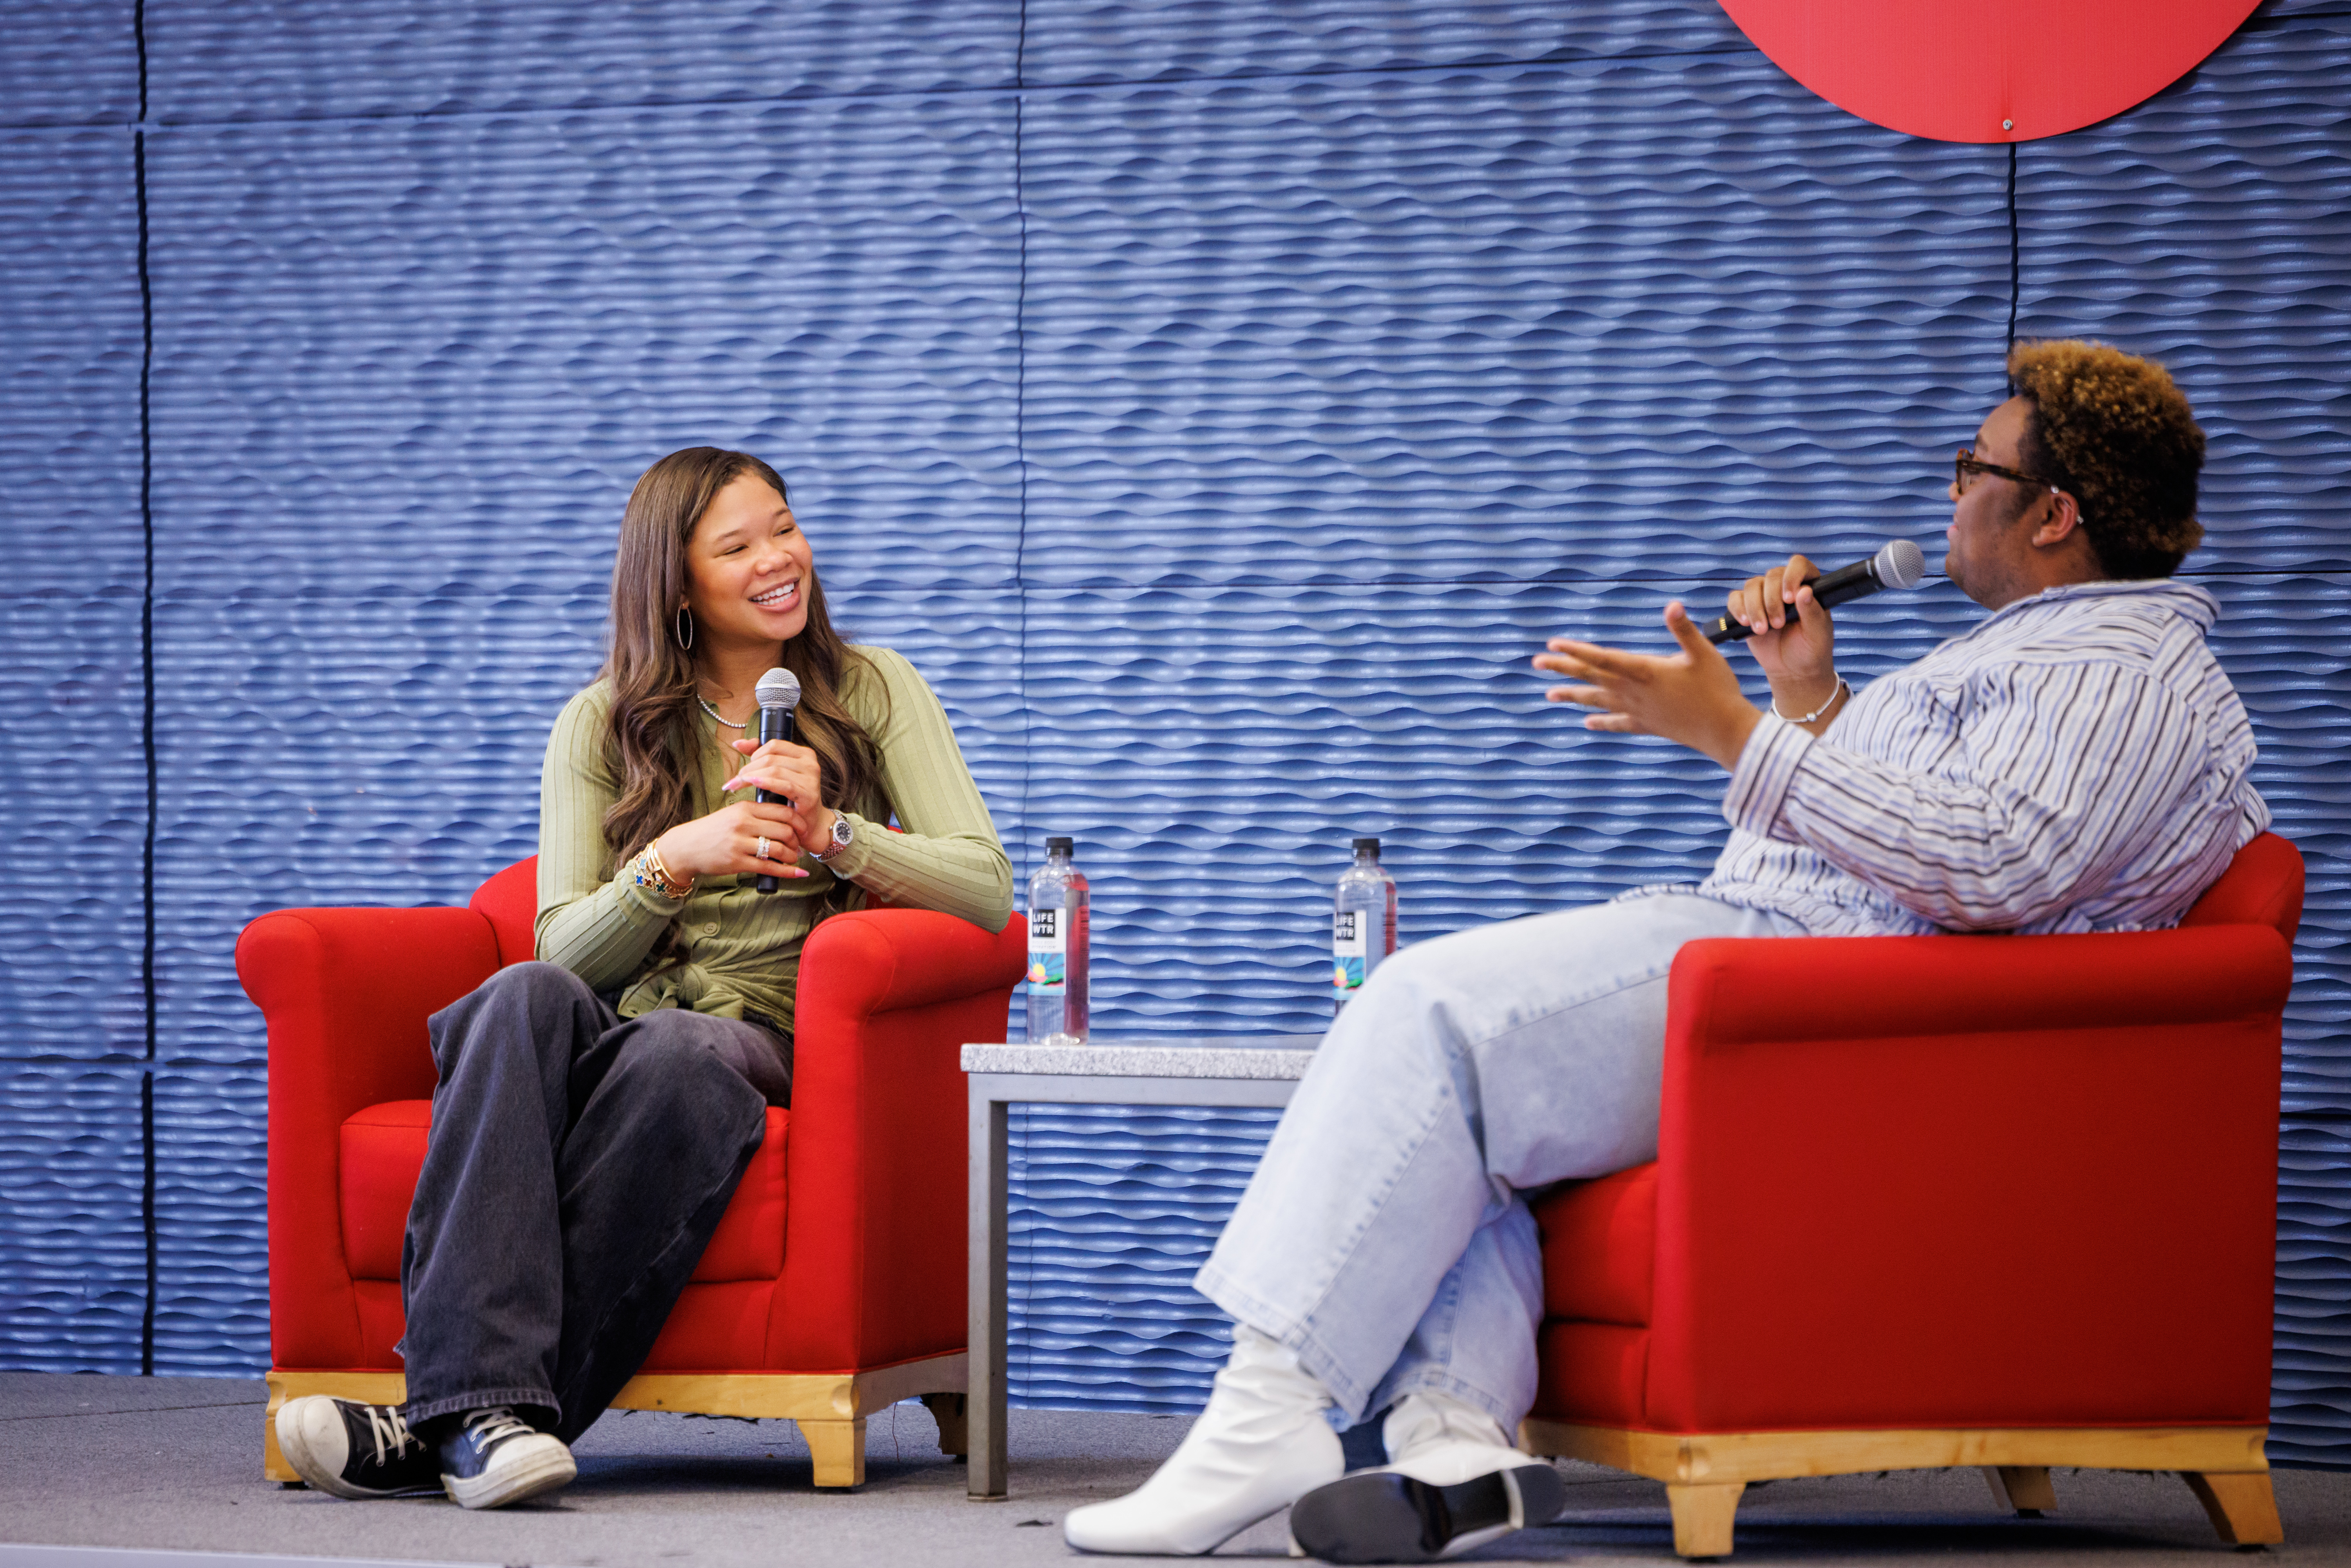 Actress Storm Reid, left, is interviewed by UIC student Lavontae Morrow during the An Evening With event from the Student Activities Board on March 29. (Photo by Adam Biba / Creative and Digital Services)